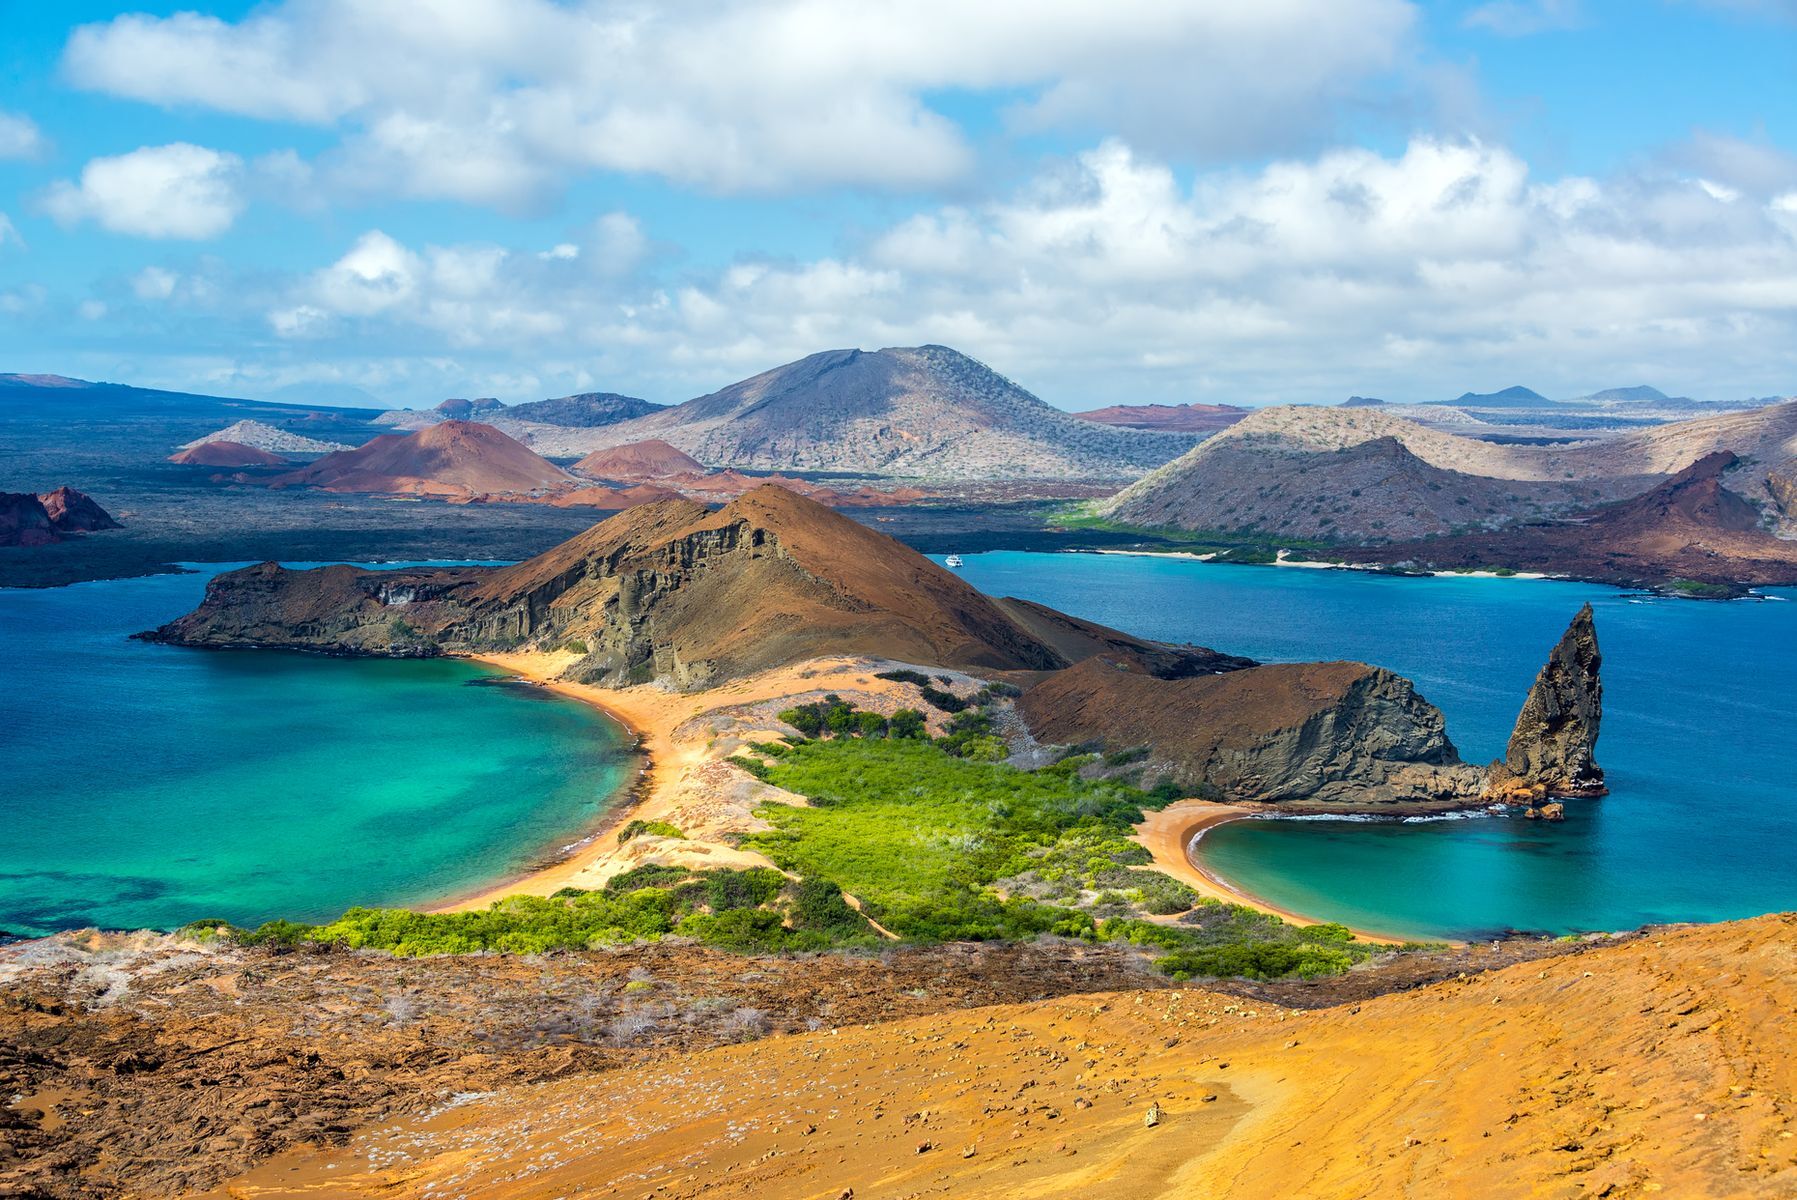 <p>Located in the heart of the Galapagos Islands, <a href="https://www.gogalapagos.com/islands/bartolome/" class="CMY_Link CMY_Valid" rel="noreferrer noopener">Bartolome</a> entices travellers with its volcanic landscapes and exceptional biodiversity. Diving enthusiasts can explore its waters rich in marine life, while hiking trails offer panoramic views of the famous Pinnacle Rock. Bartolome is also known for its resident penguins, sea lions, and other iconic wildlife, making this natural gem worth exploring at least once in your life.</p>